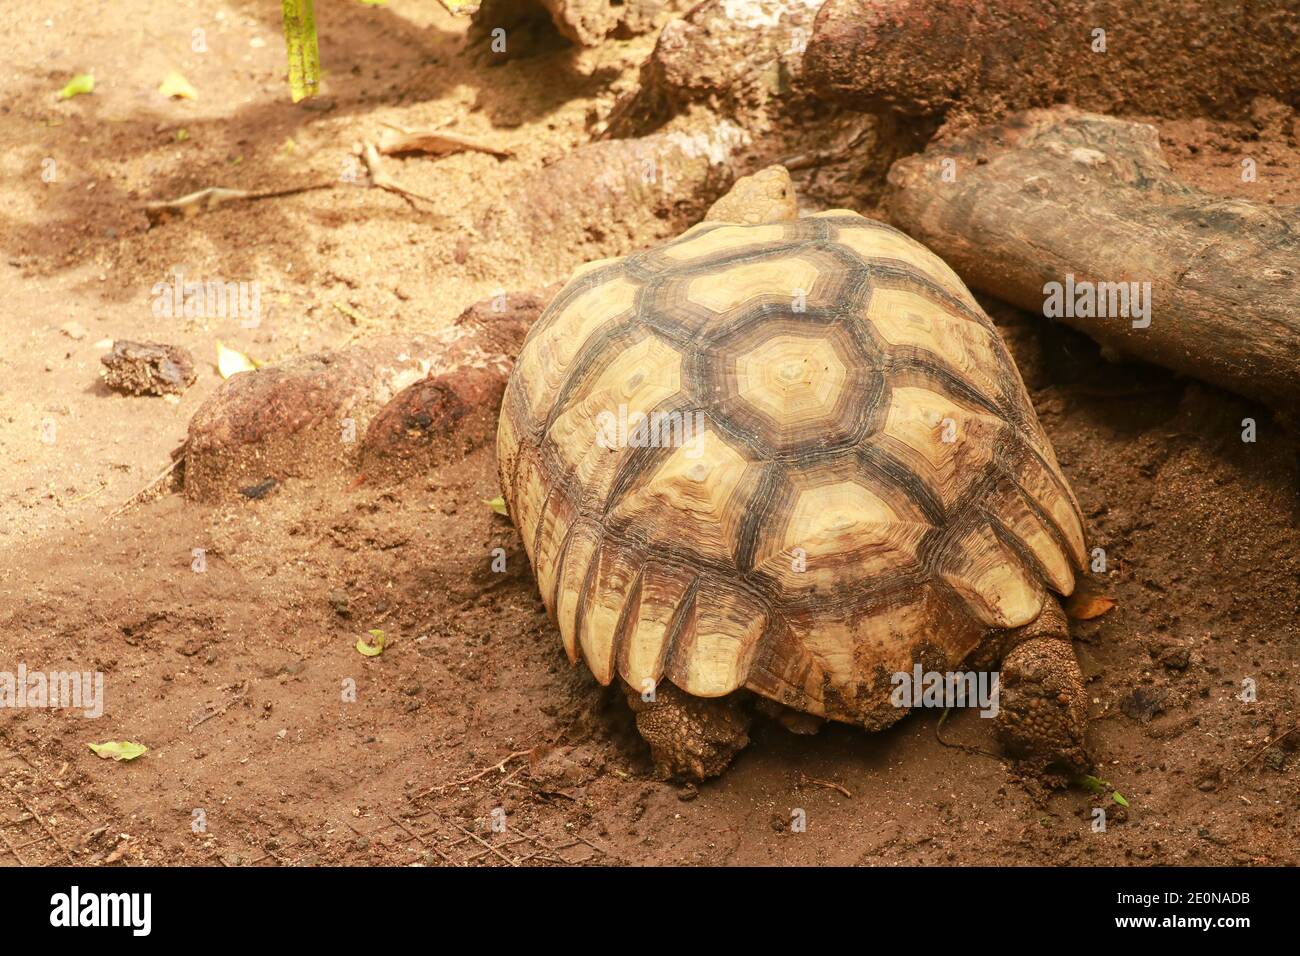 The Asian forest tortoise Manouria emys, also known as the Asian brown tortoise. Stock Photo